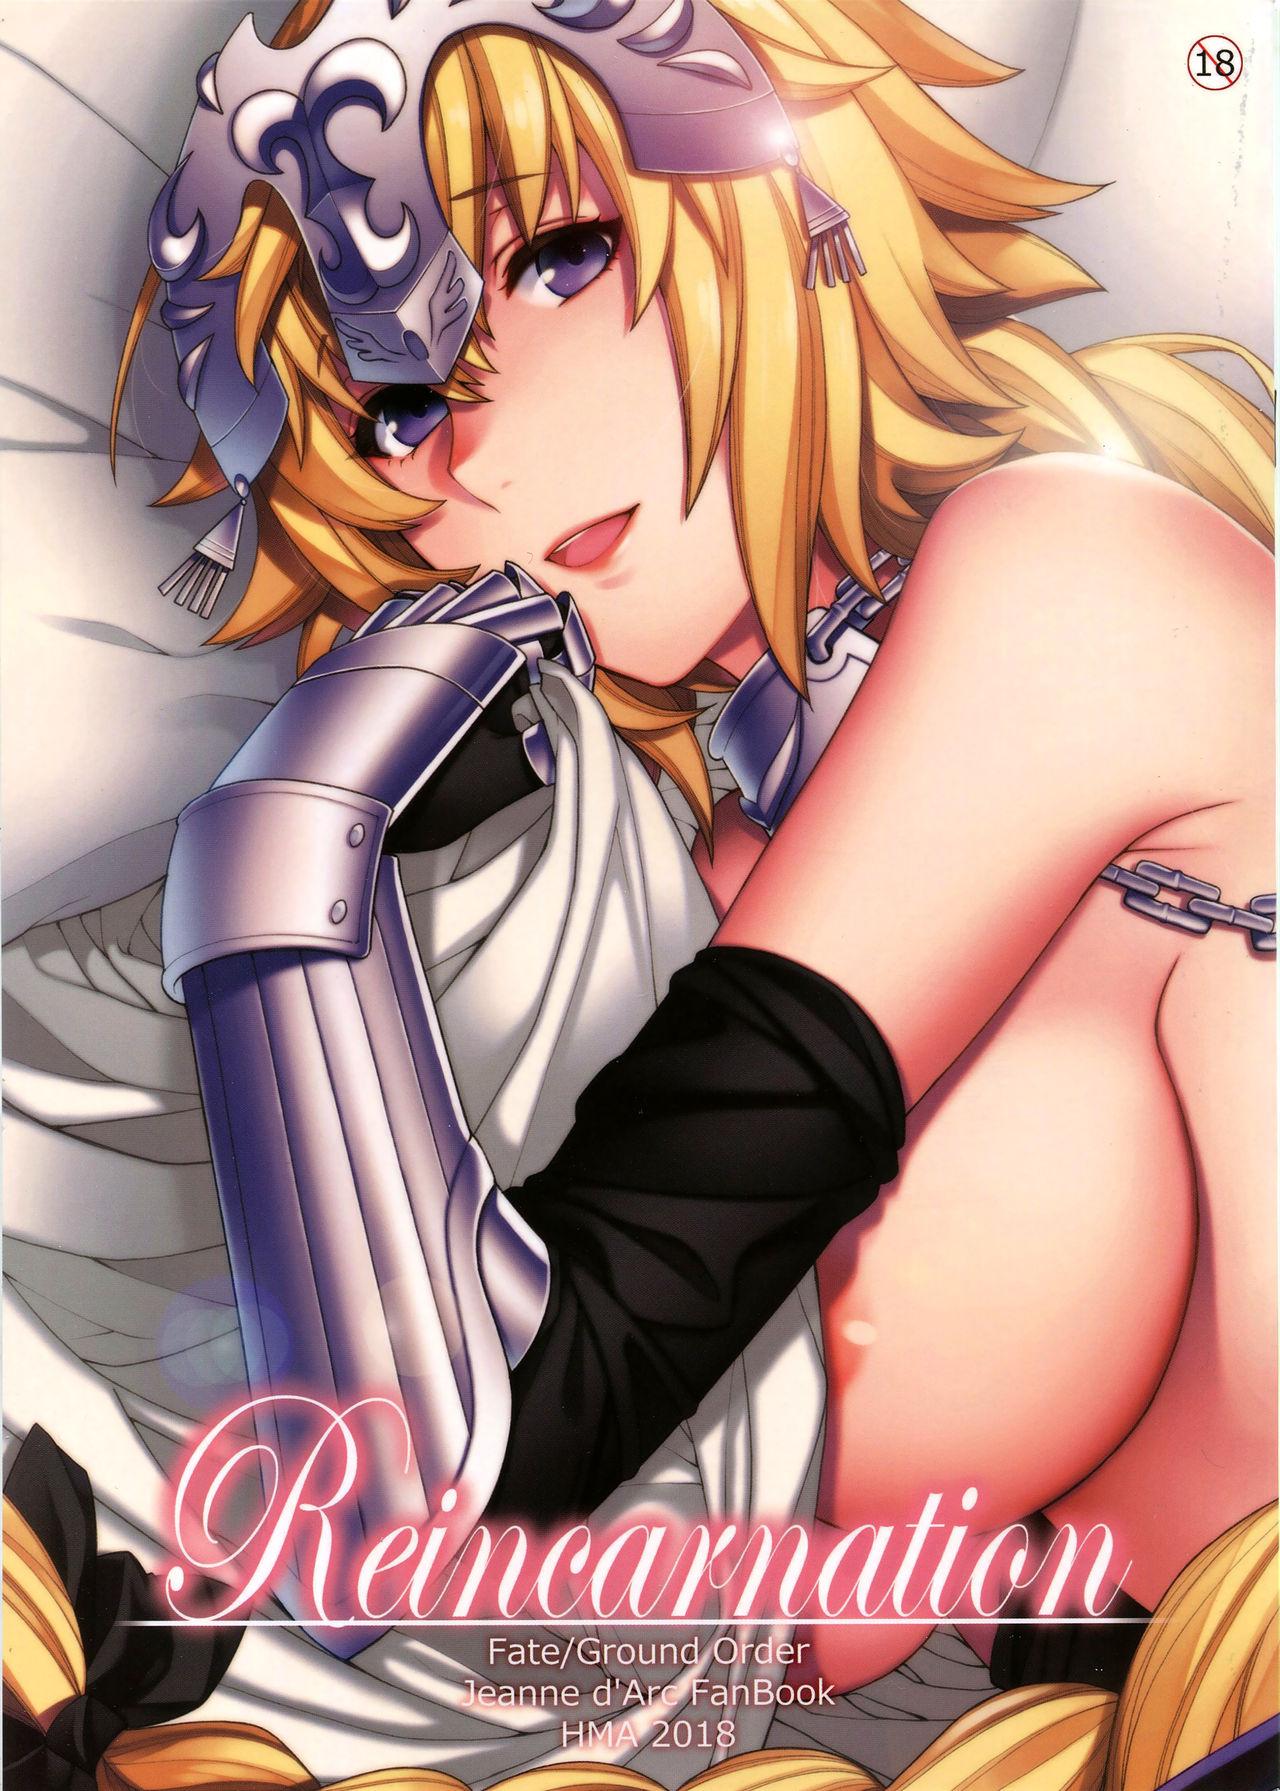 Webcamsex Reincarnation - Fate grand order Shaved - Page 1